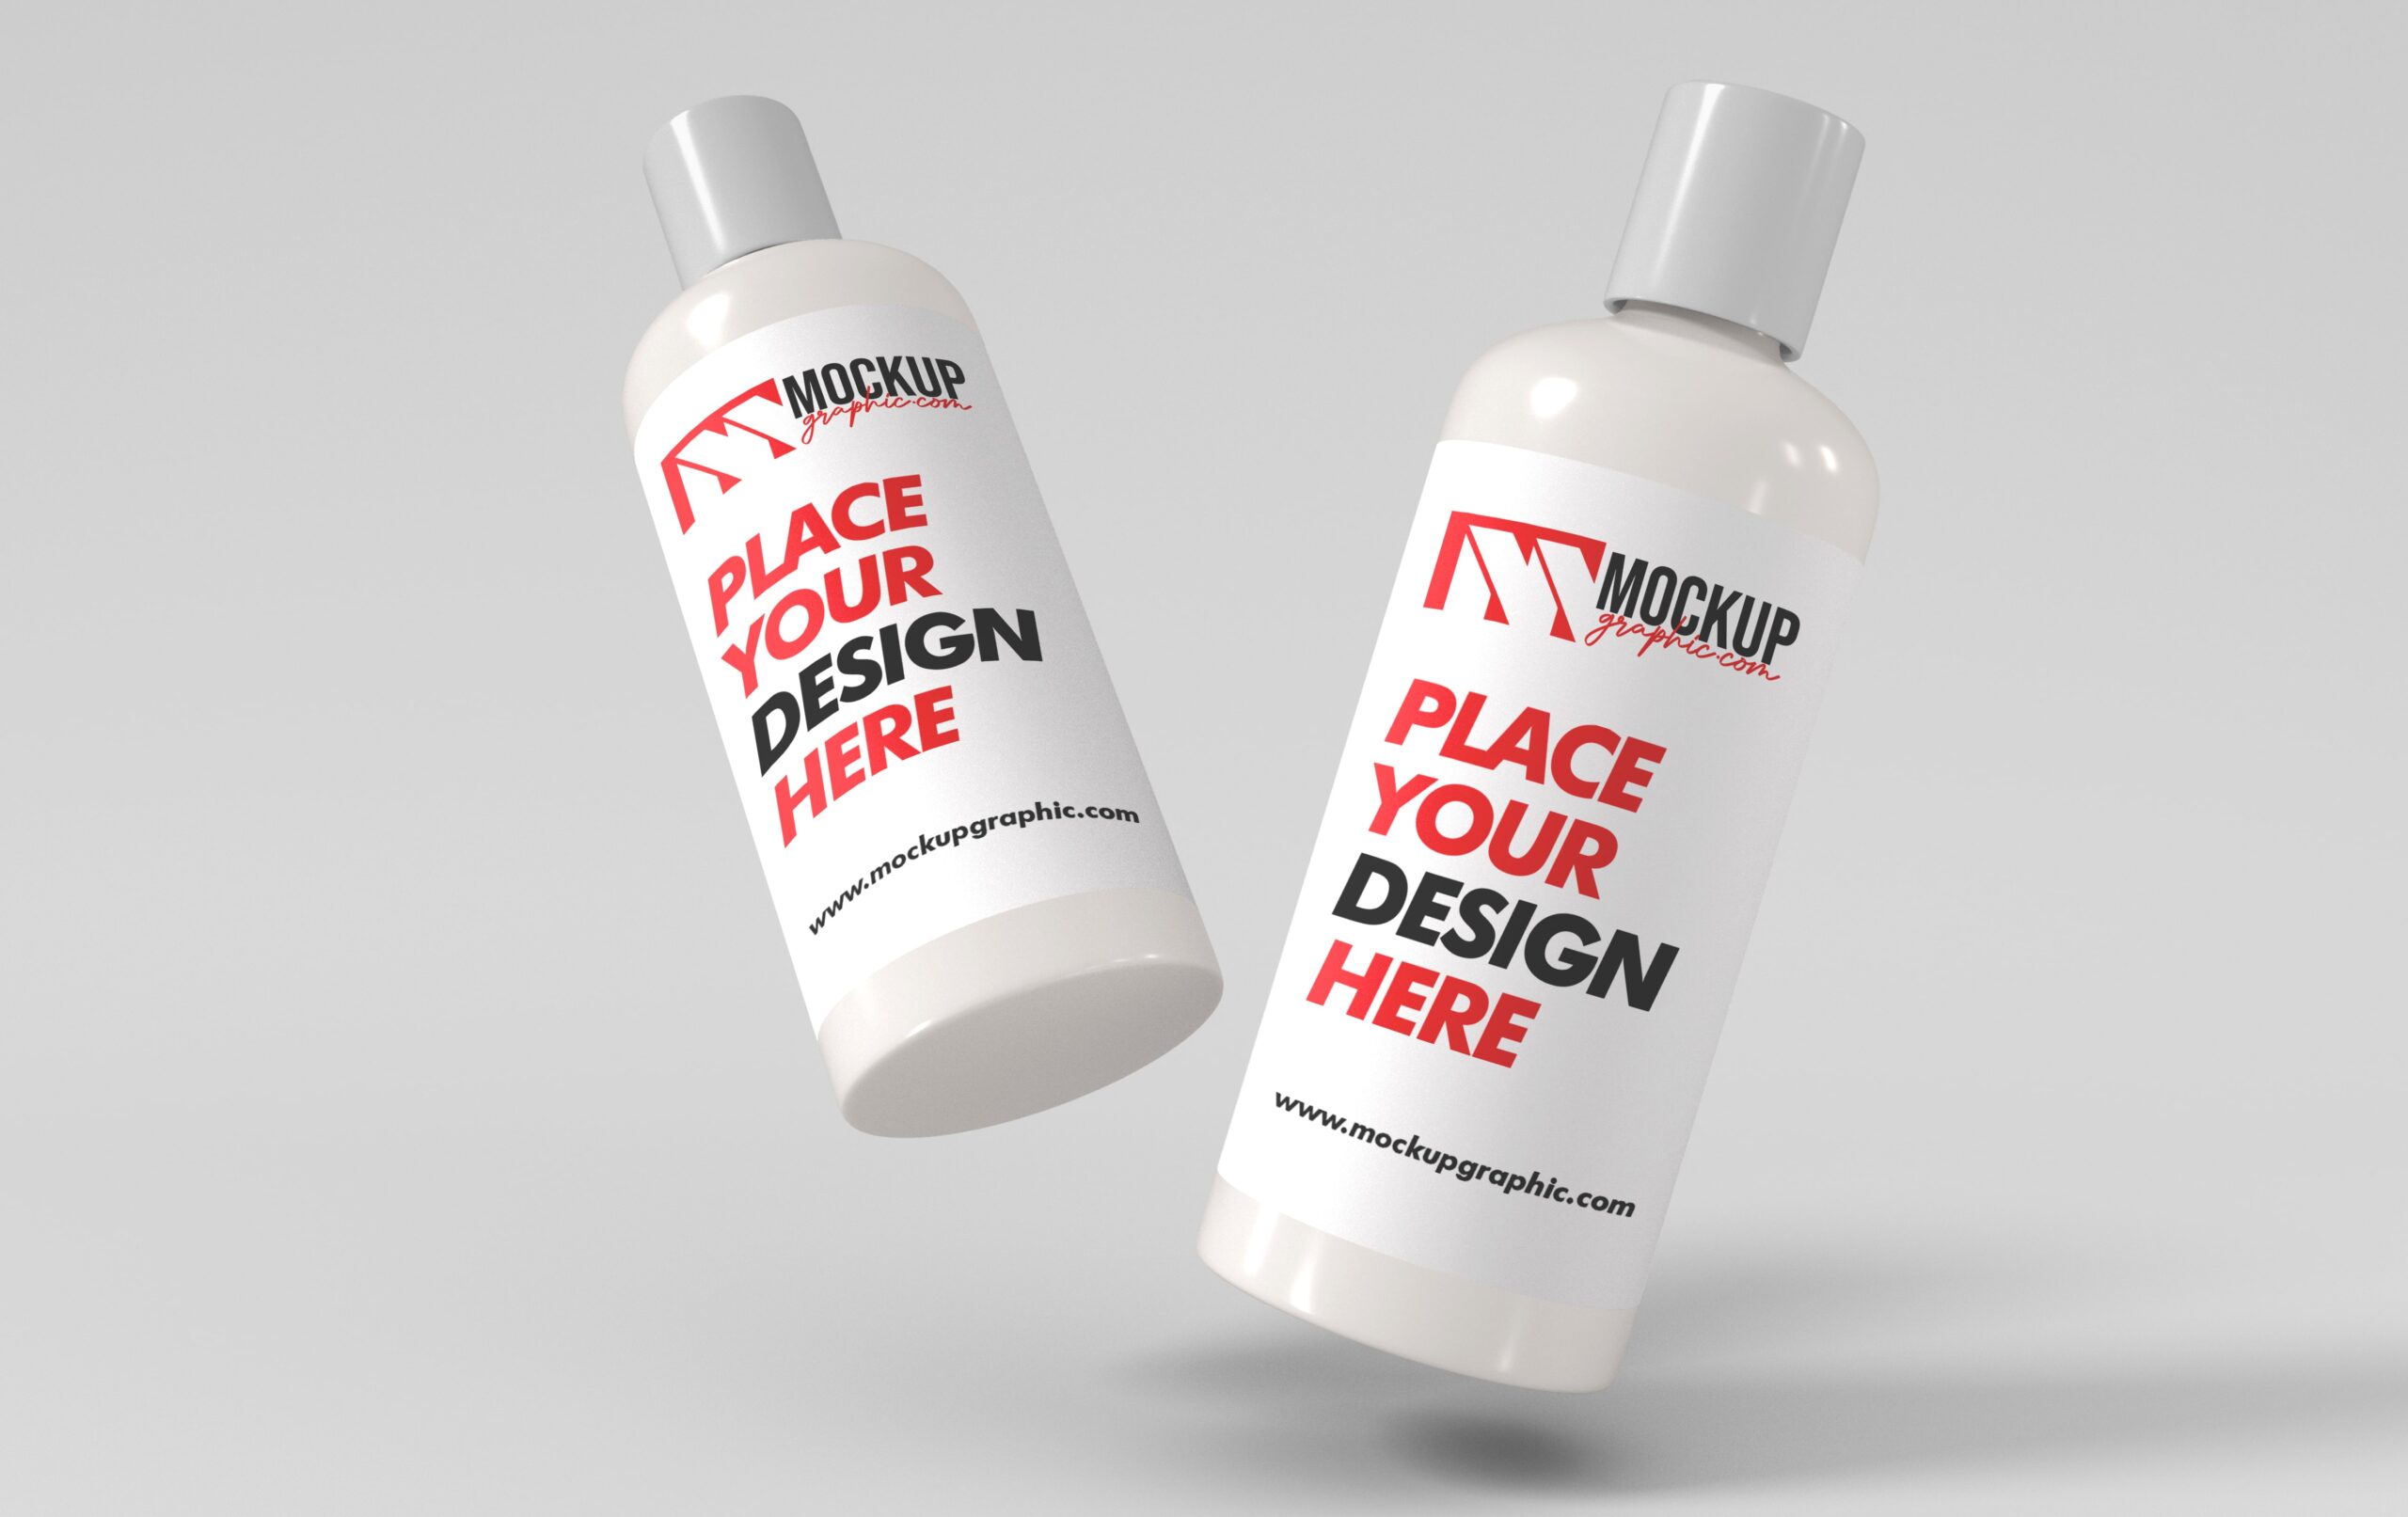 PSD_ Cosmetic_ Bottle_ Packaging_ Mockup_Design_www.mockupgraphic.com